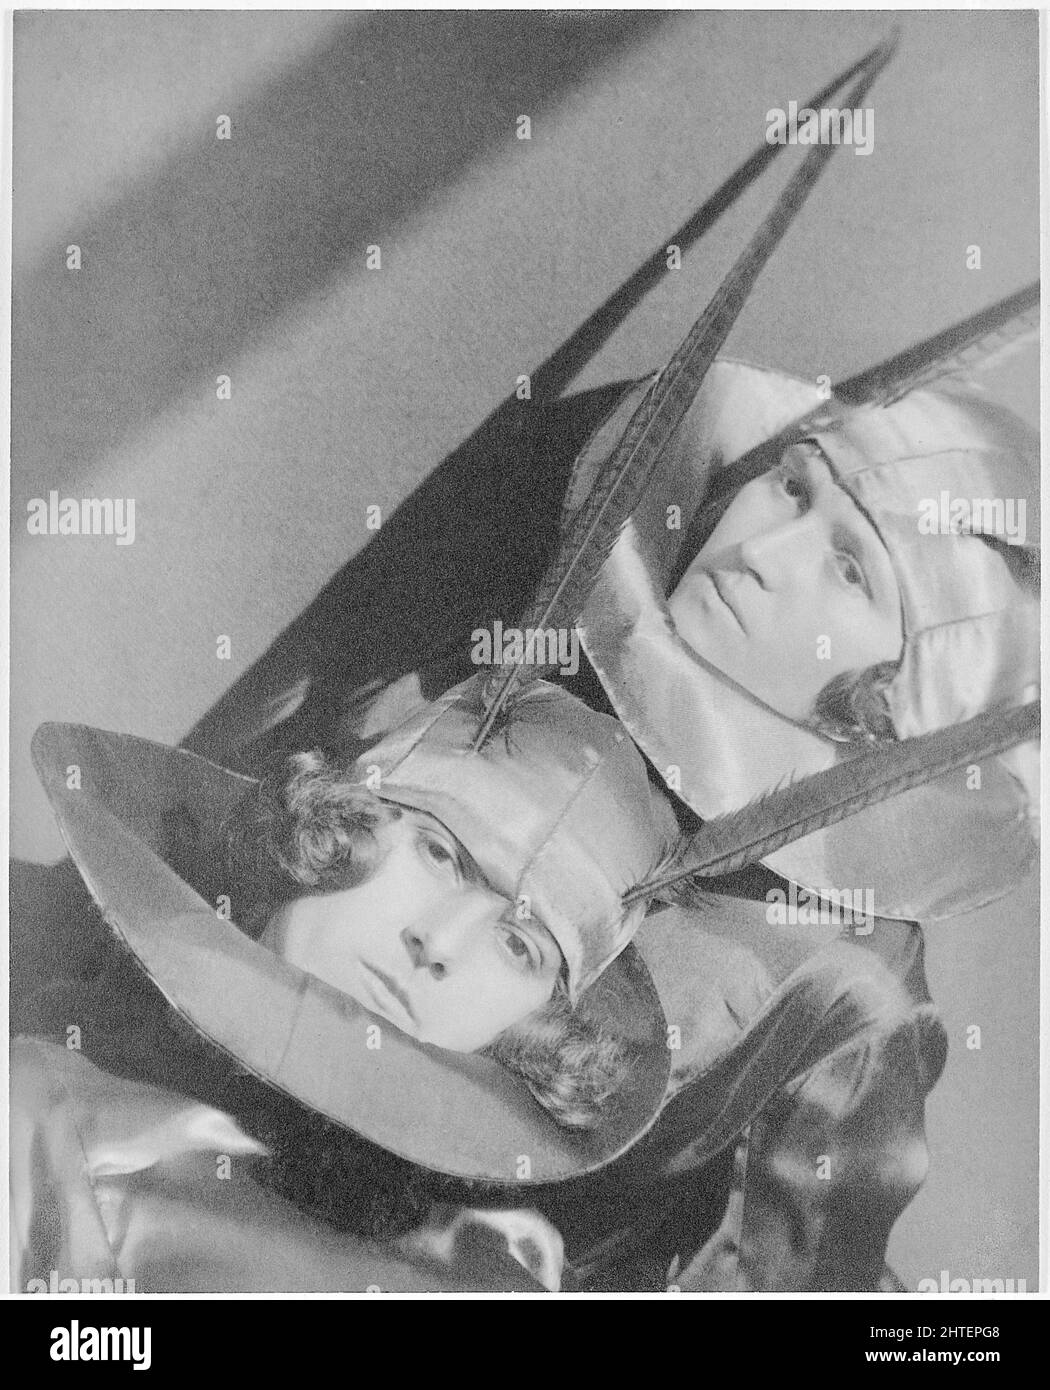 Jaromir Funke (Czech Photographer) - After the Carnival - circa 1924 - Two people with feathers sticking out from aviator caps - Weird Stock Photo